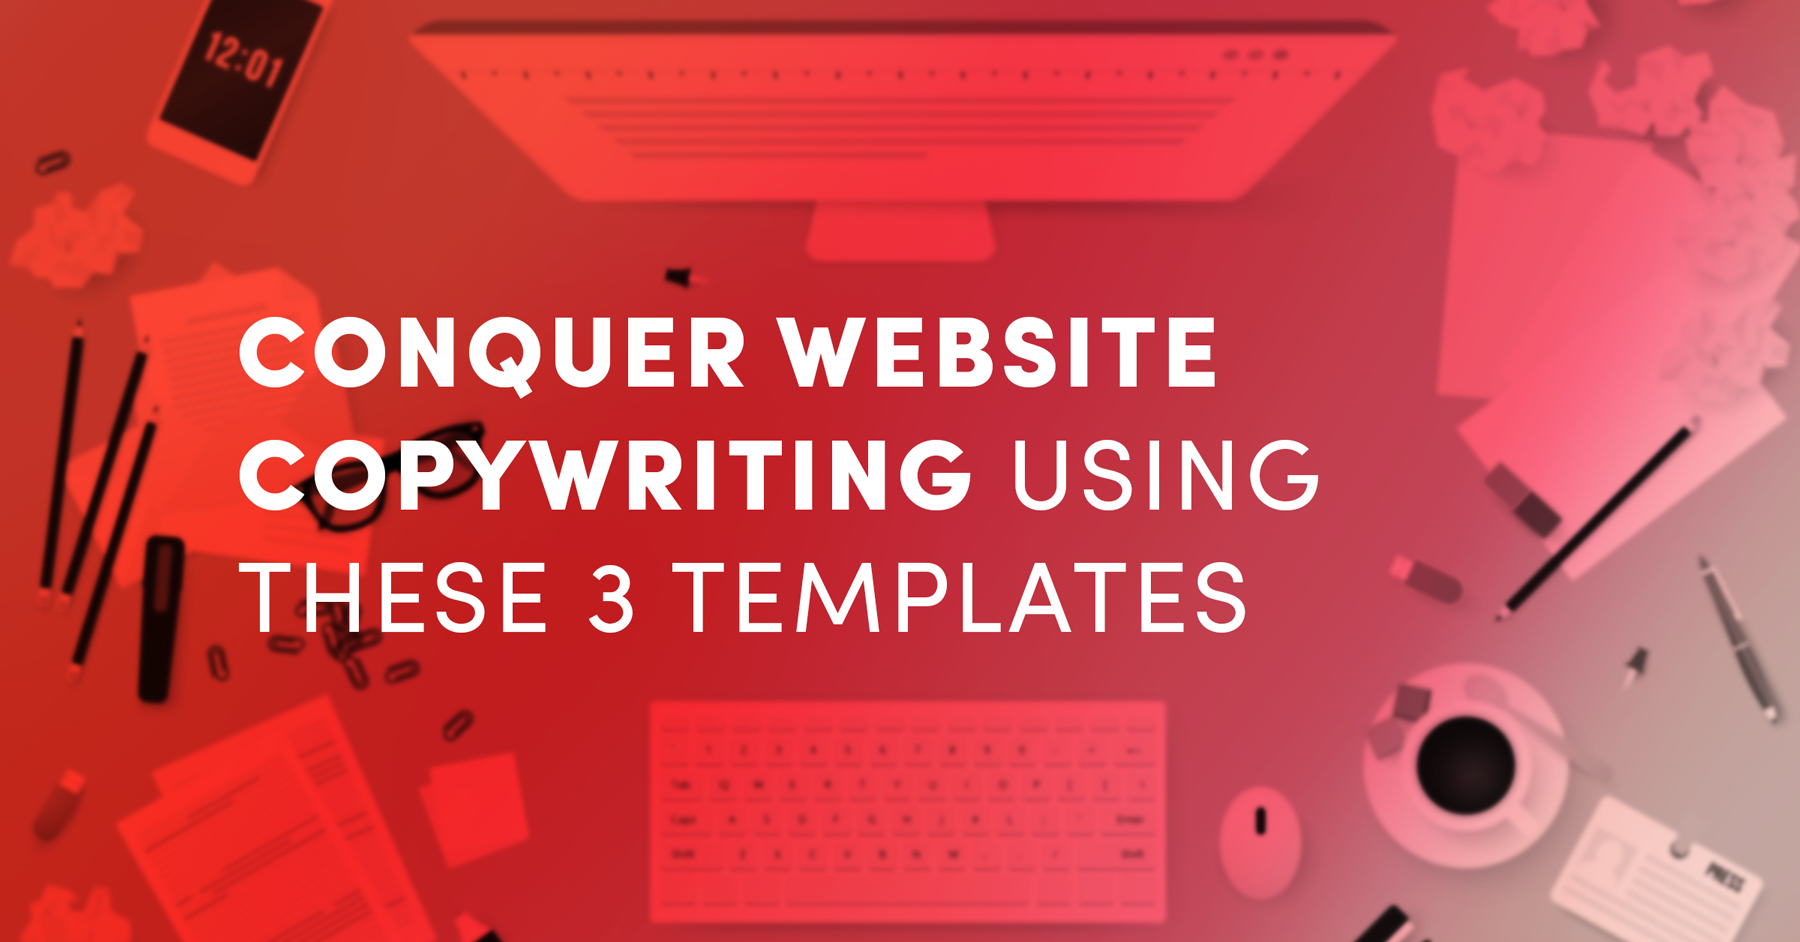 Conquer Website Copywriting Using These 3 Templates